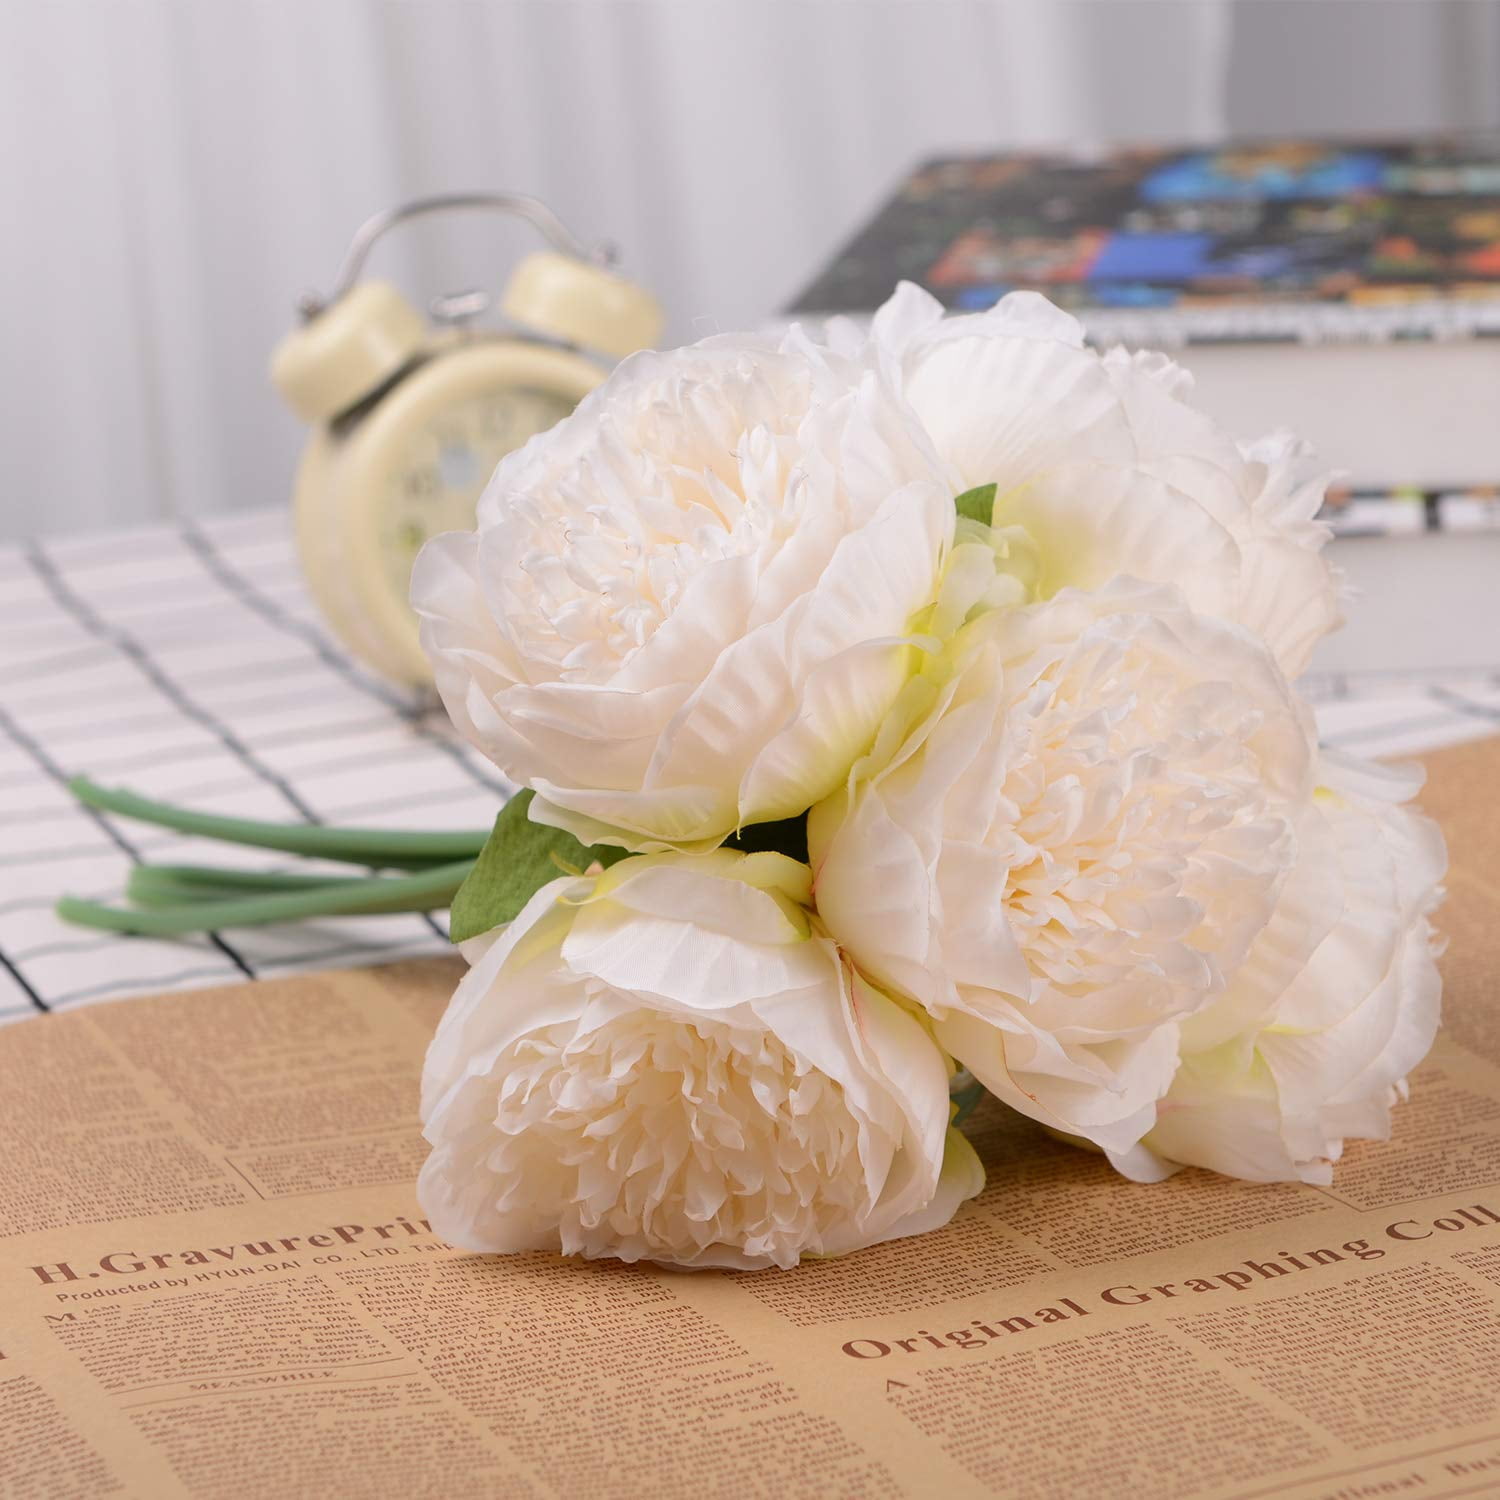 MaxFox Artificial Flowers 7 Heads Peony Silk Fake Bouquet Vintage Flower Bouquets Home Office Wedding Party Decor 